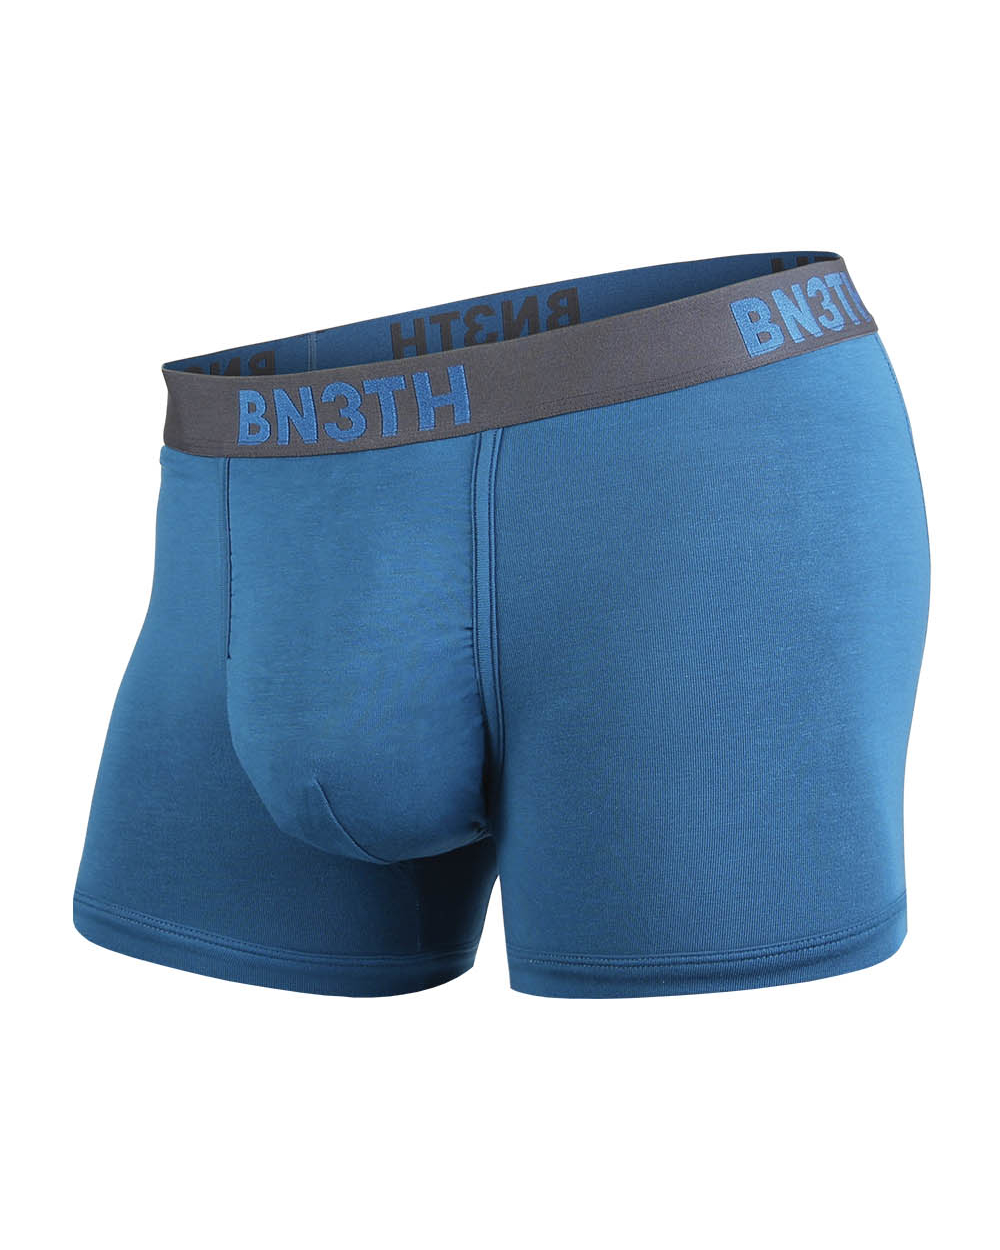 Classic short-Teal-Slate-Front-BN3TH-underwear